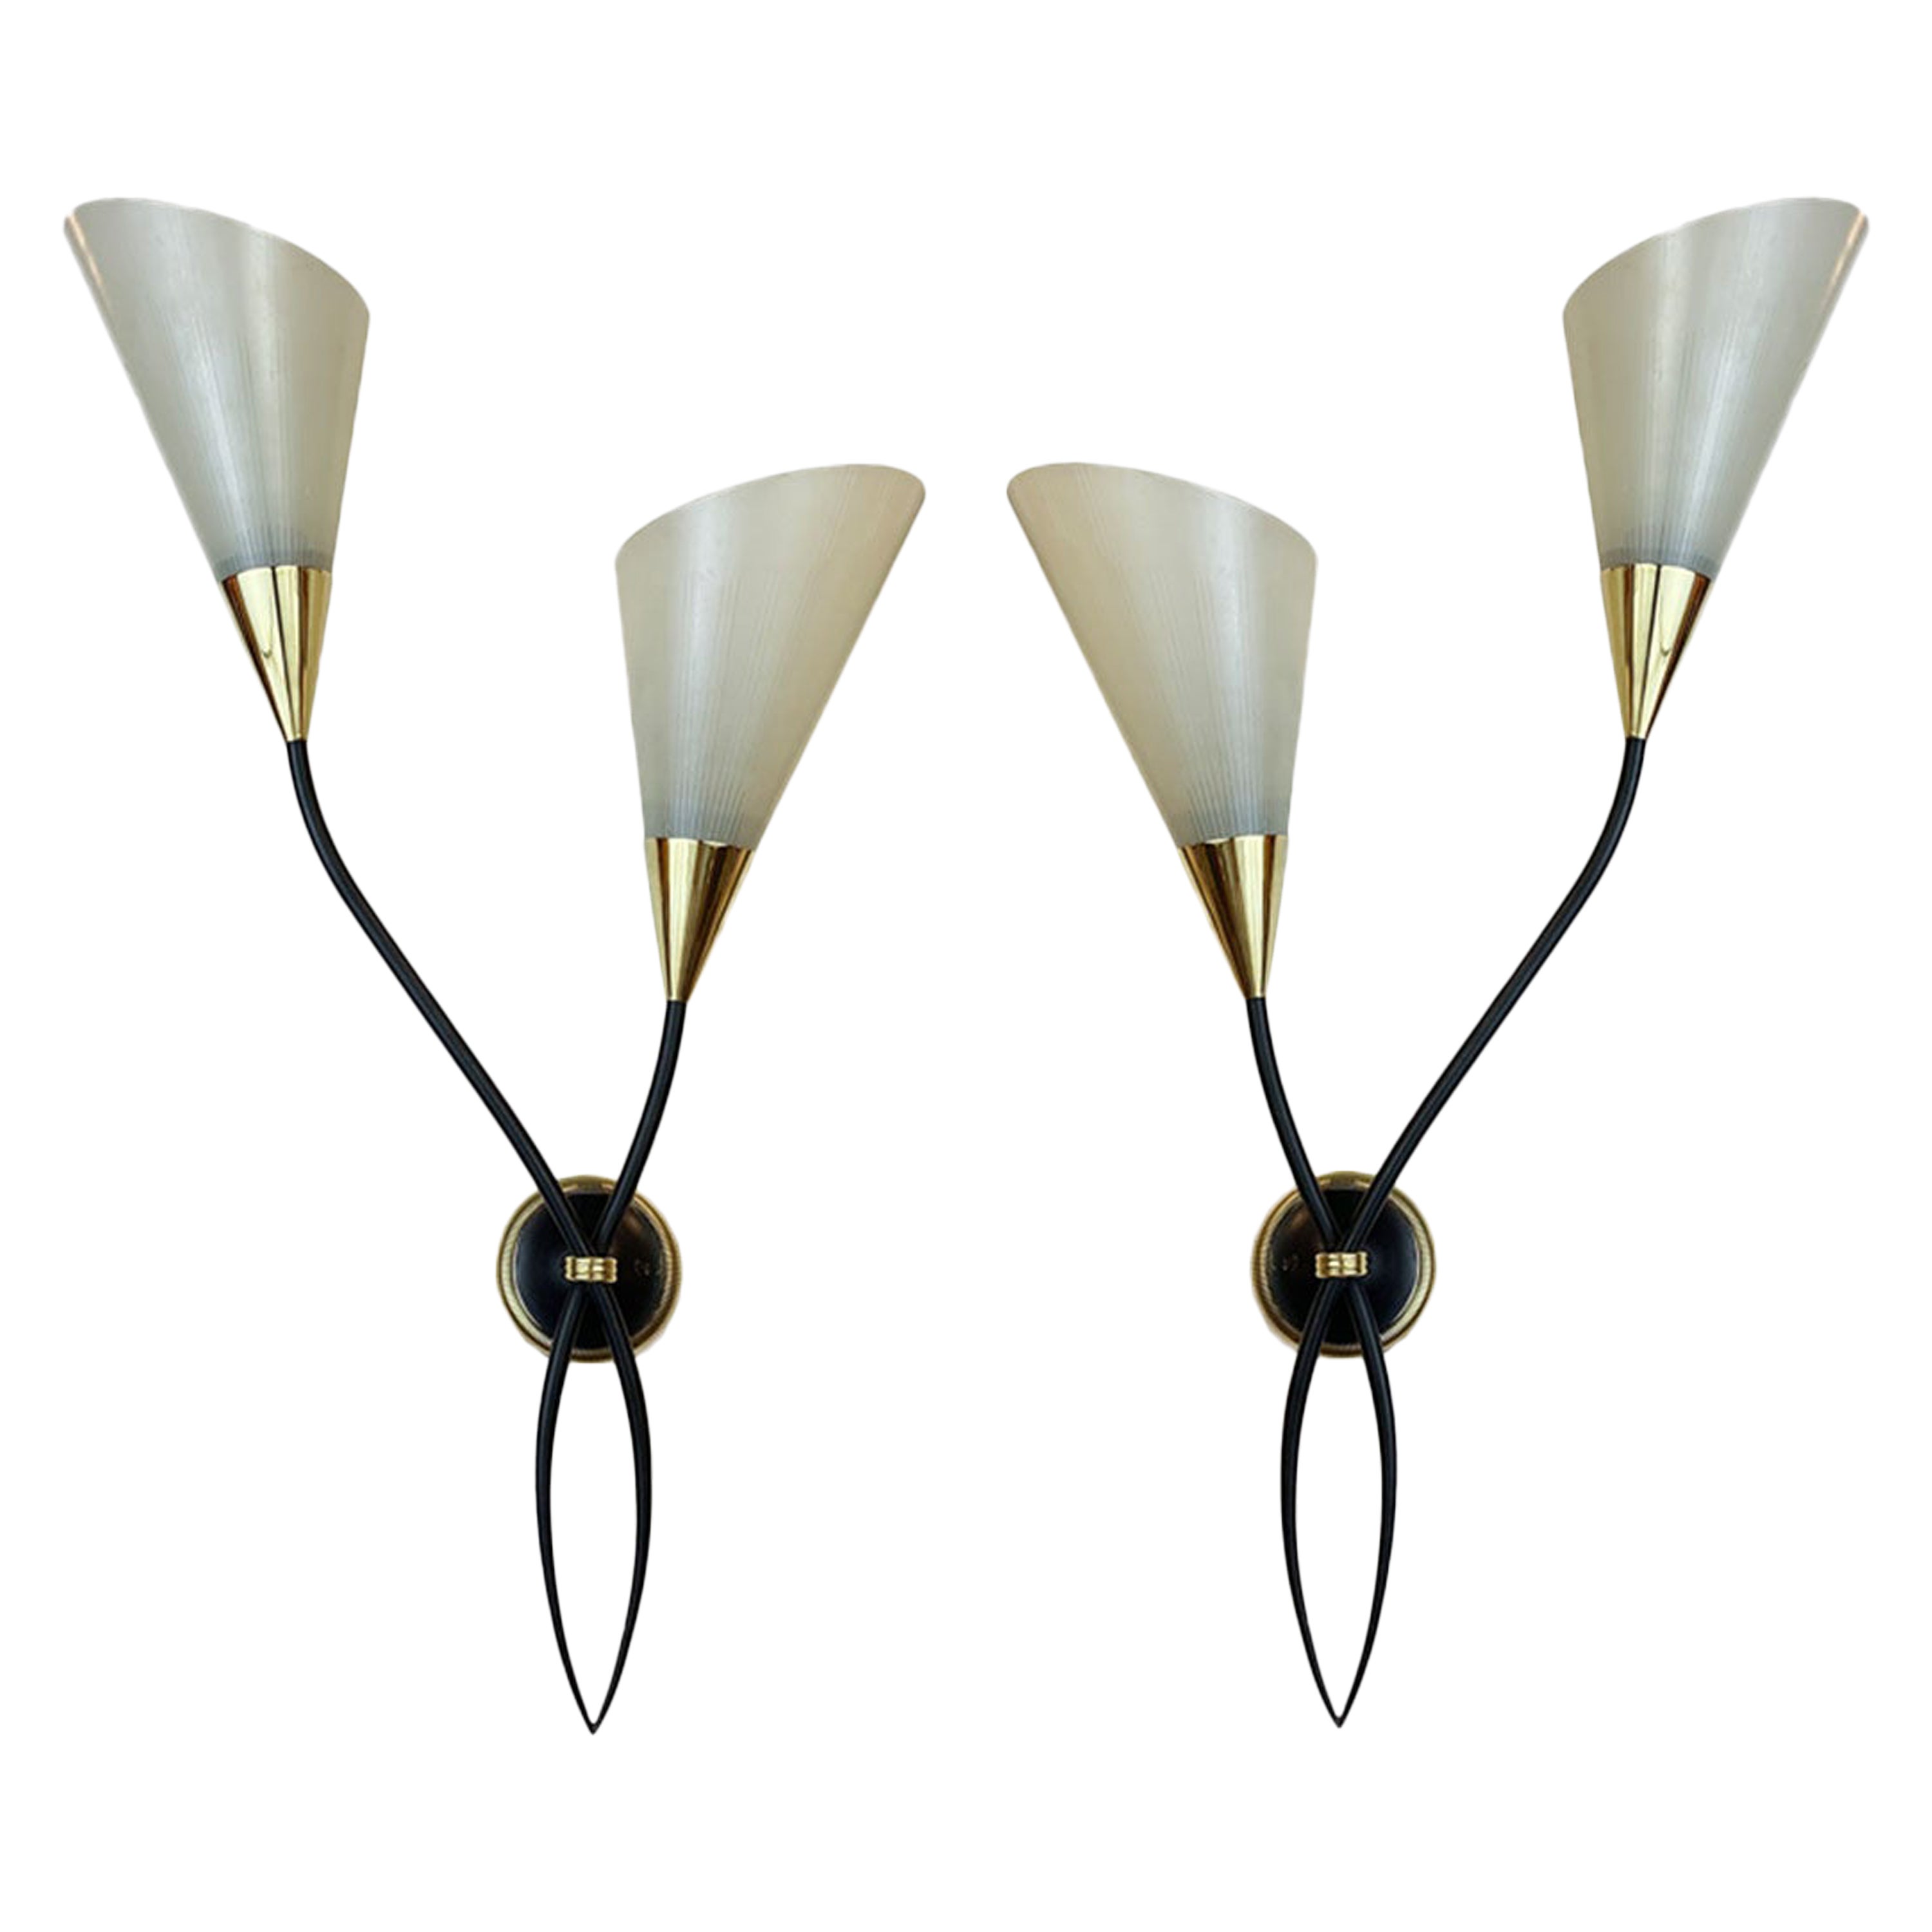 Gorgeous Mid-Century Modern Style Pair of Wall Lamps, circa 1950s